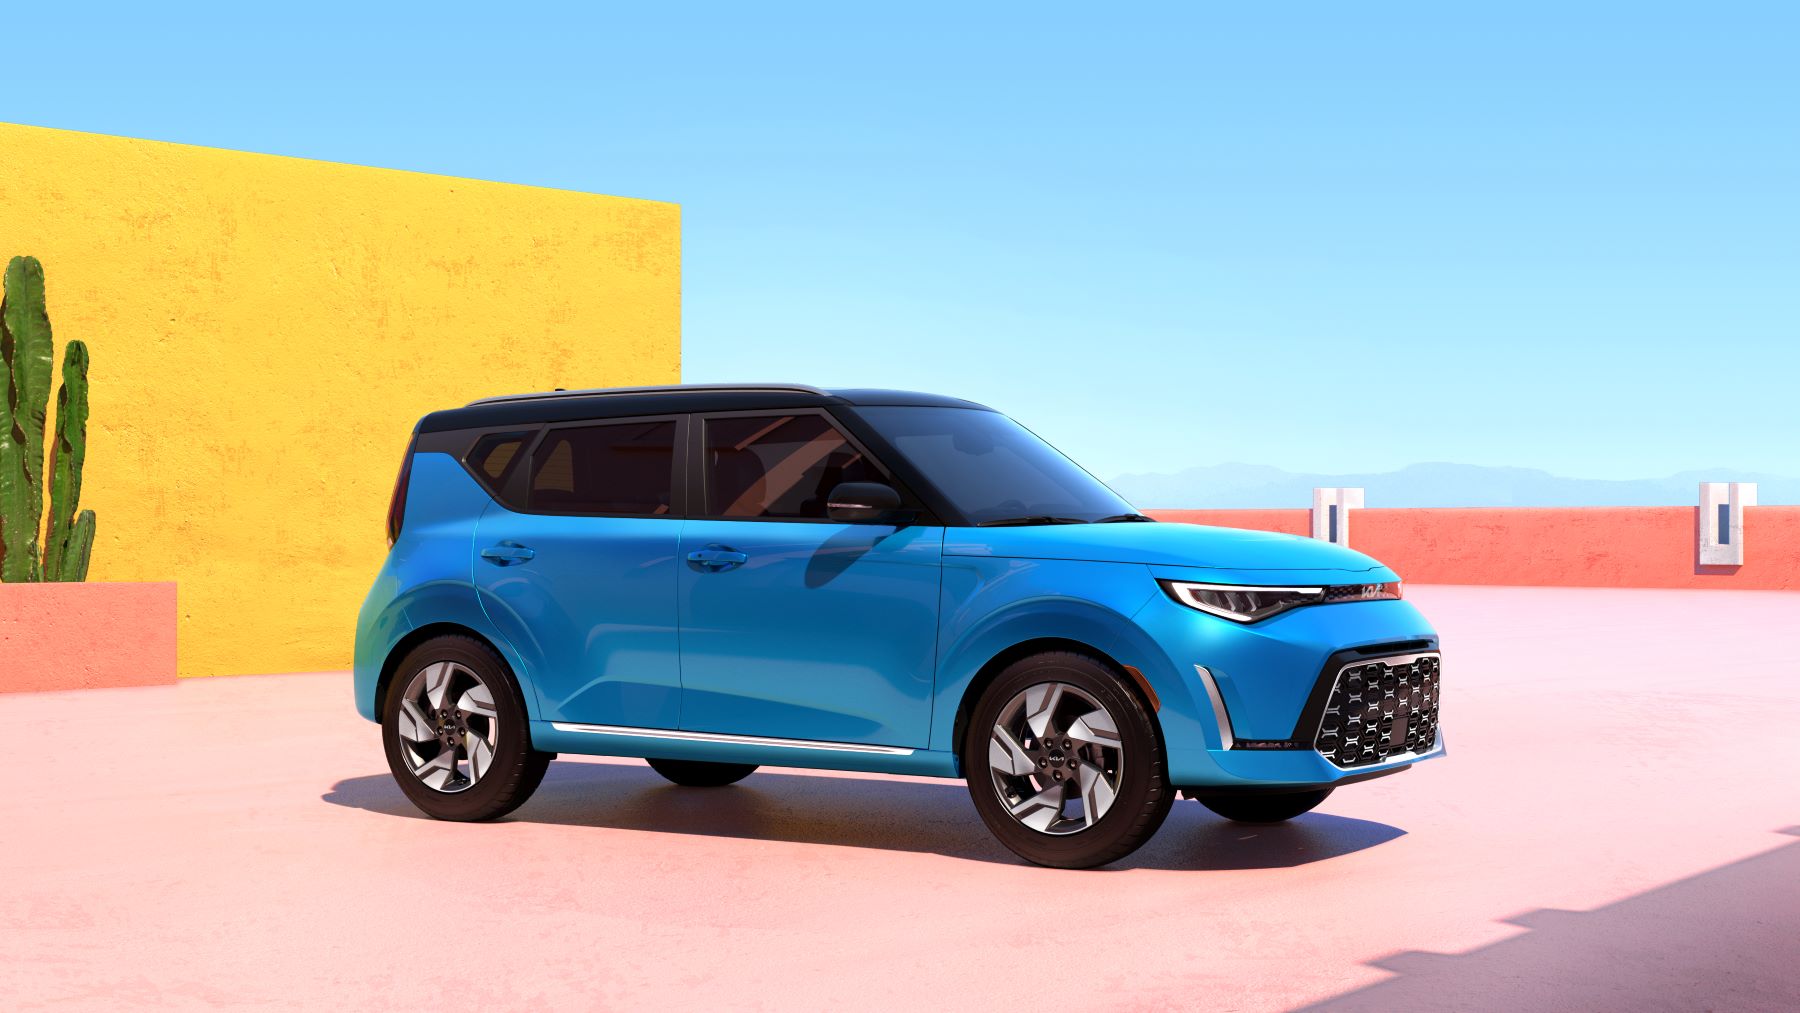 A light blue 2023 Kia Soul subcompact crossover SUV model parked in a desert location on a pink plaza near a cactus